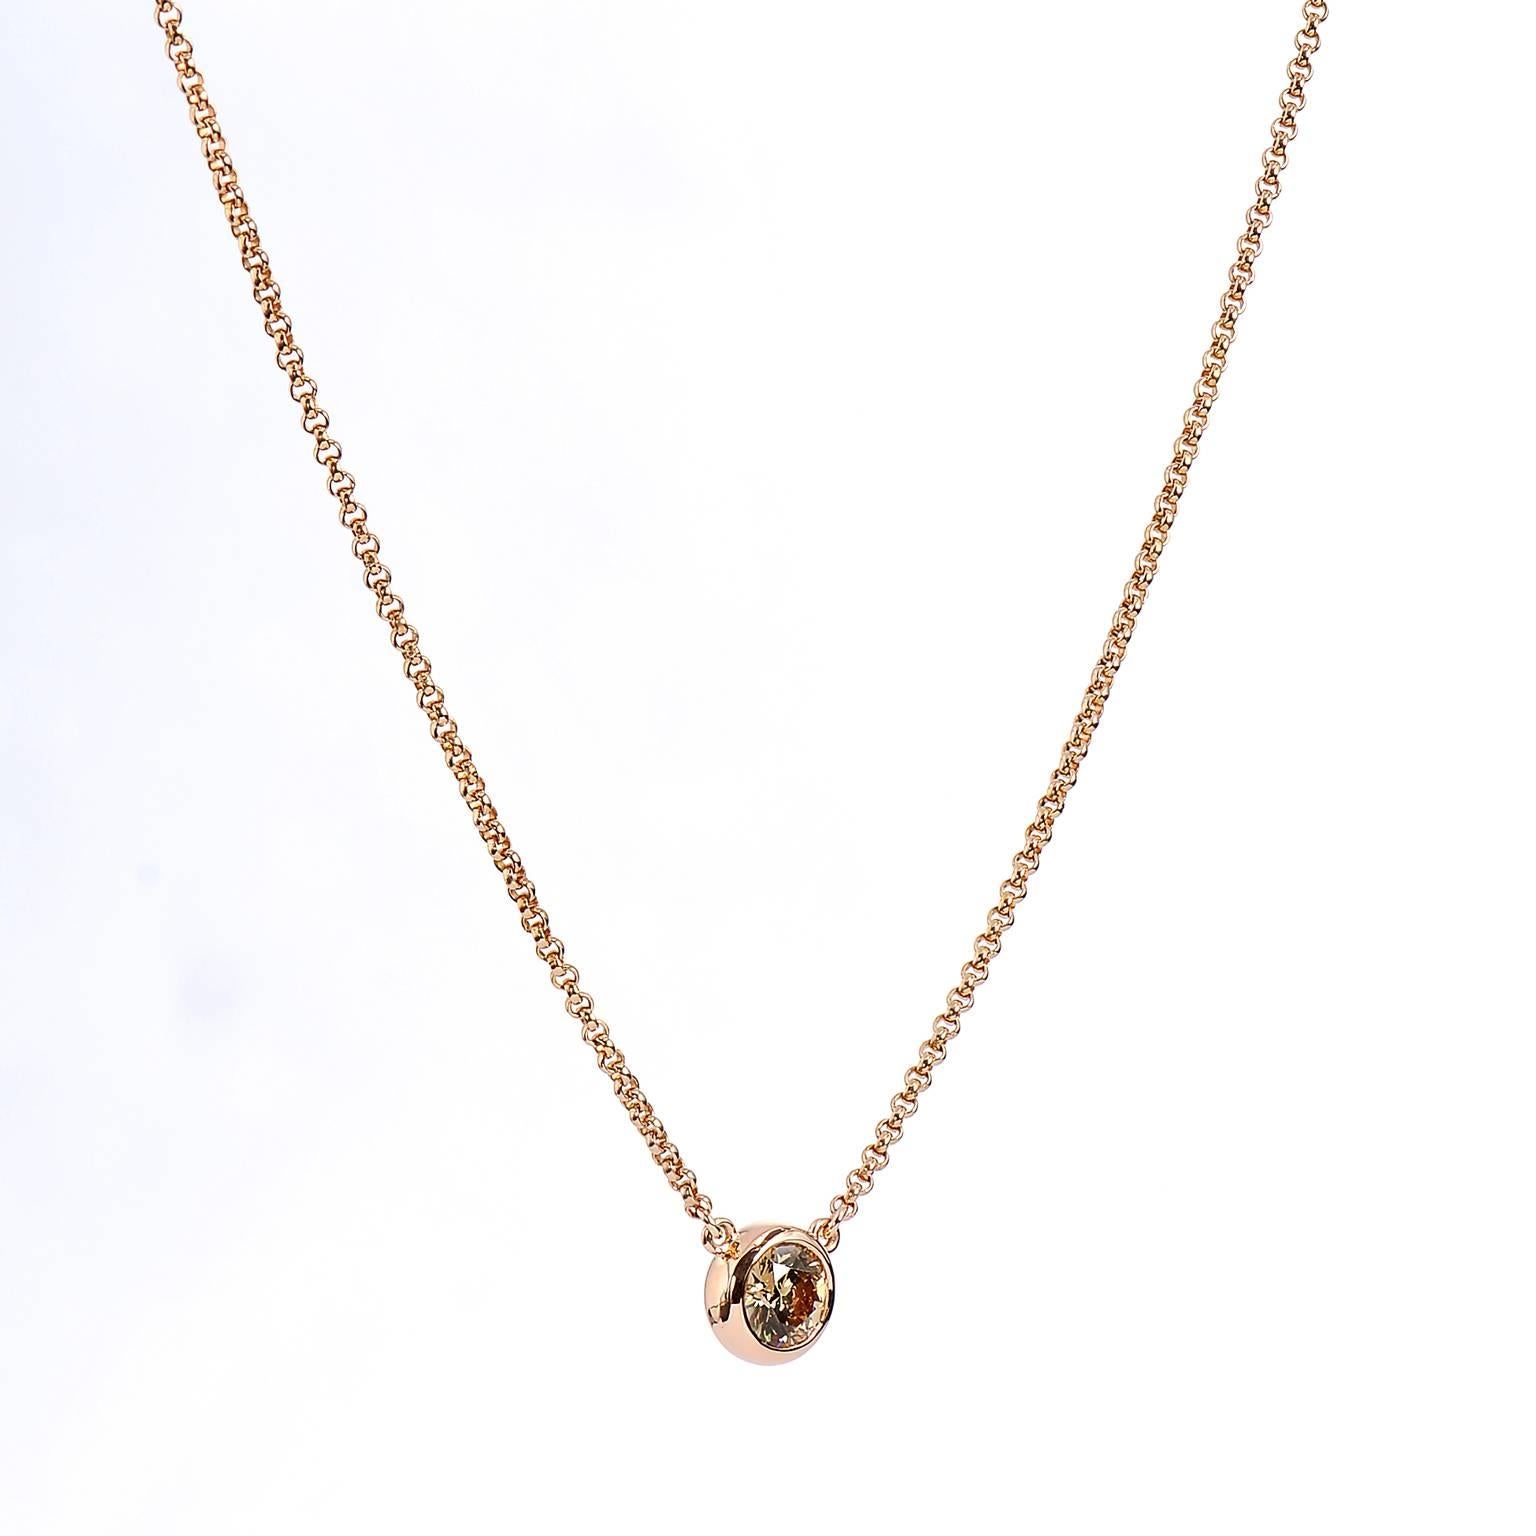 This H and H 18 karat rose gold pendant features a lovely brownish-yellow 0.72 carat diamond at center bezel set (VS1). Simplicity and refinement reign supreme in this piece. 